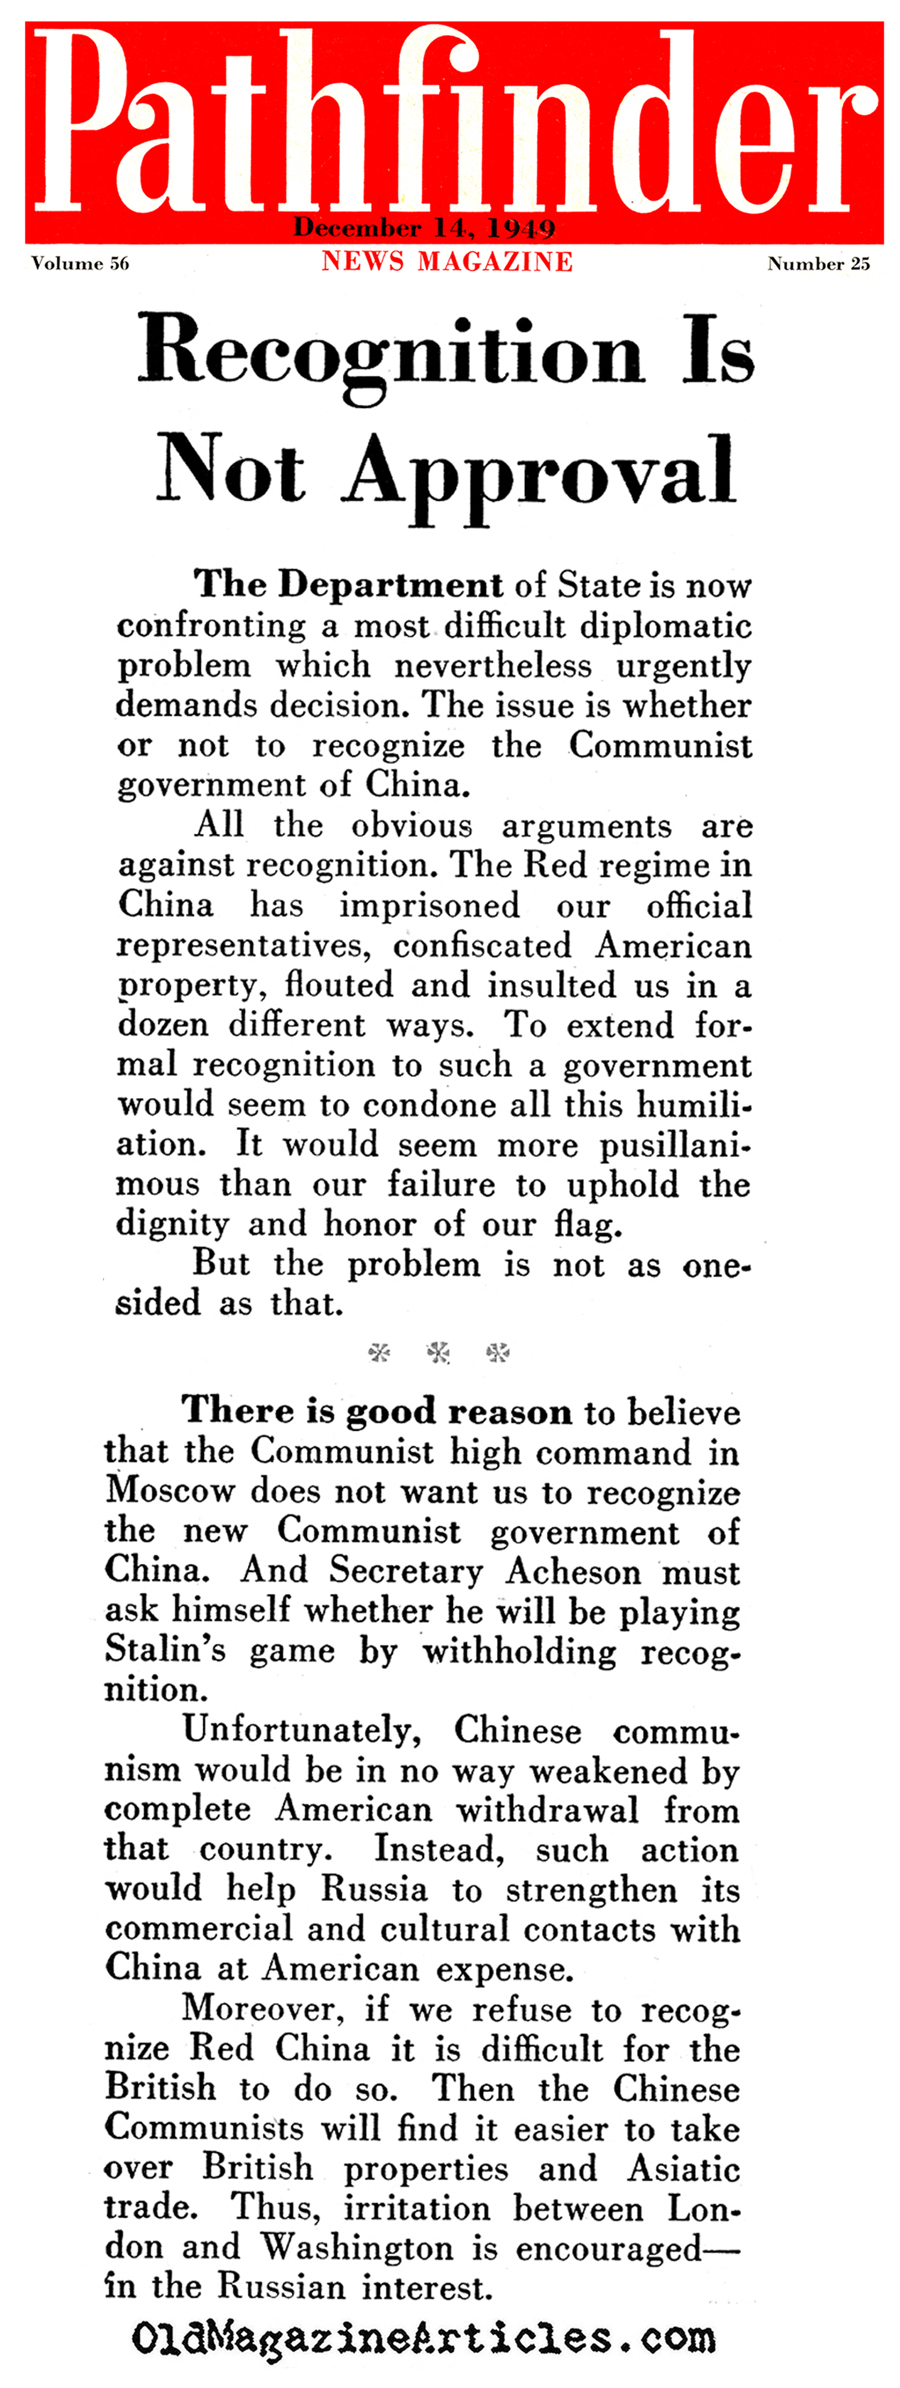 Did Stalin Want the U.S. to Recognize China?  (Pathfinder Magazine, 1949)